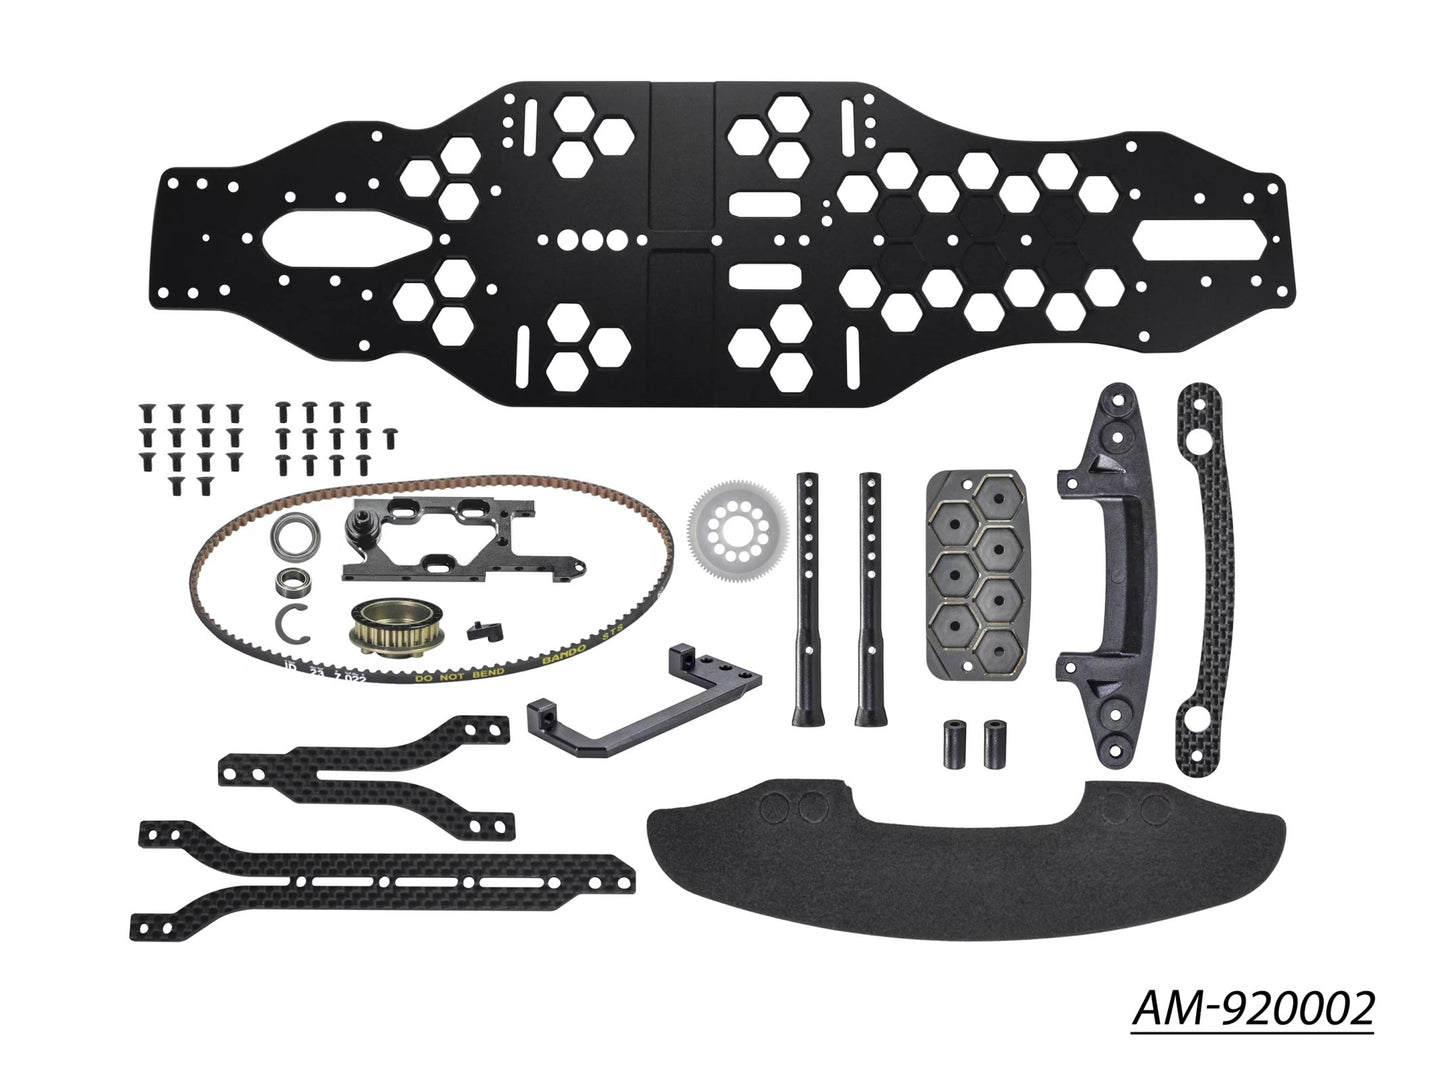 AM Medius Xray T4 FWD Conversion Kit (Chassis 7075 ) (AM-920002)